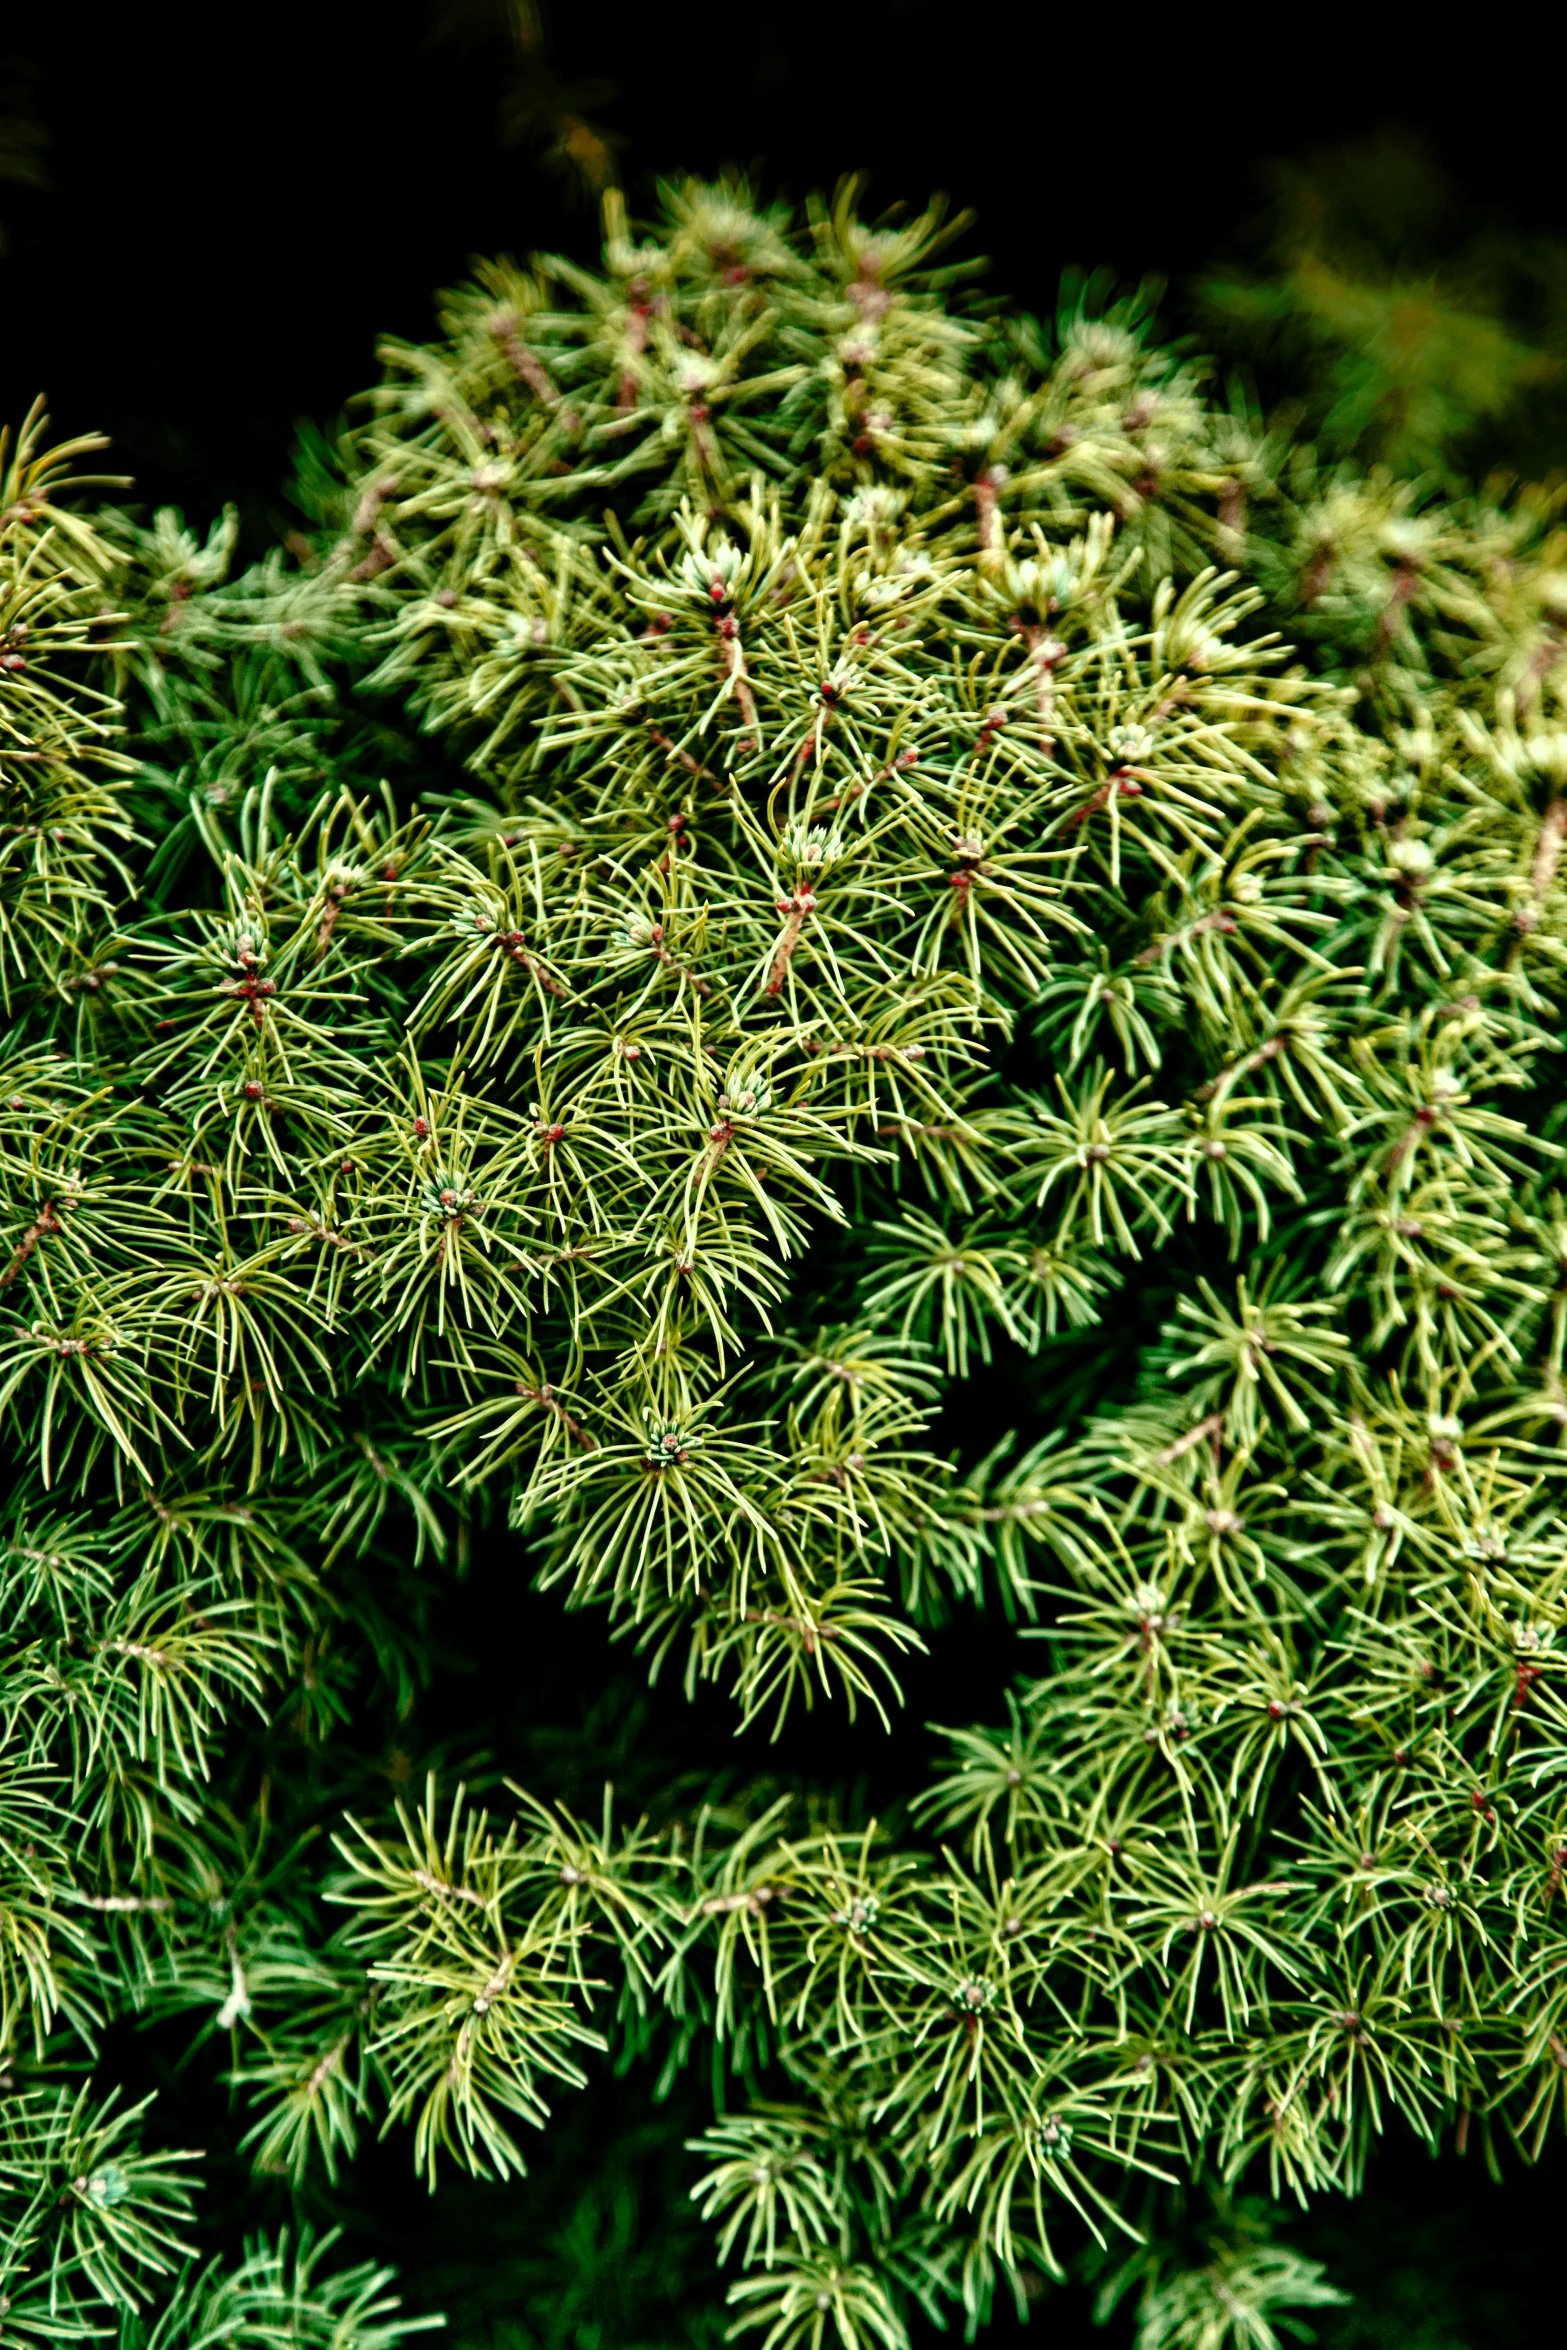 a close up of a plant with green needles, fir trees, shrubs, treebeard, premium quality